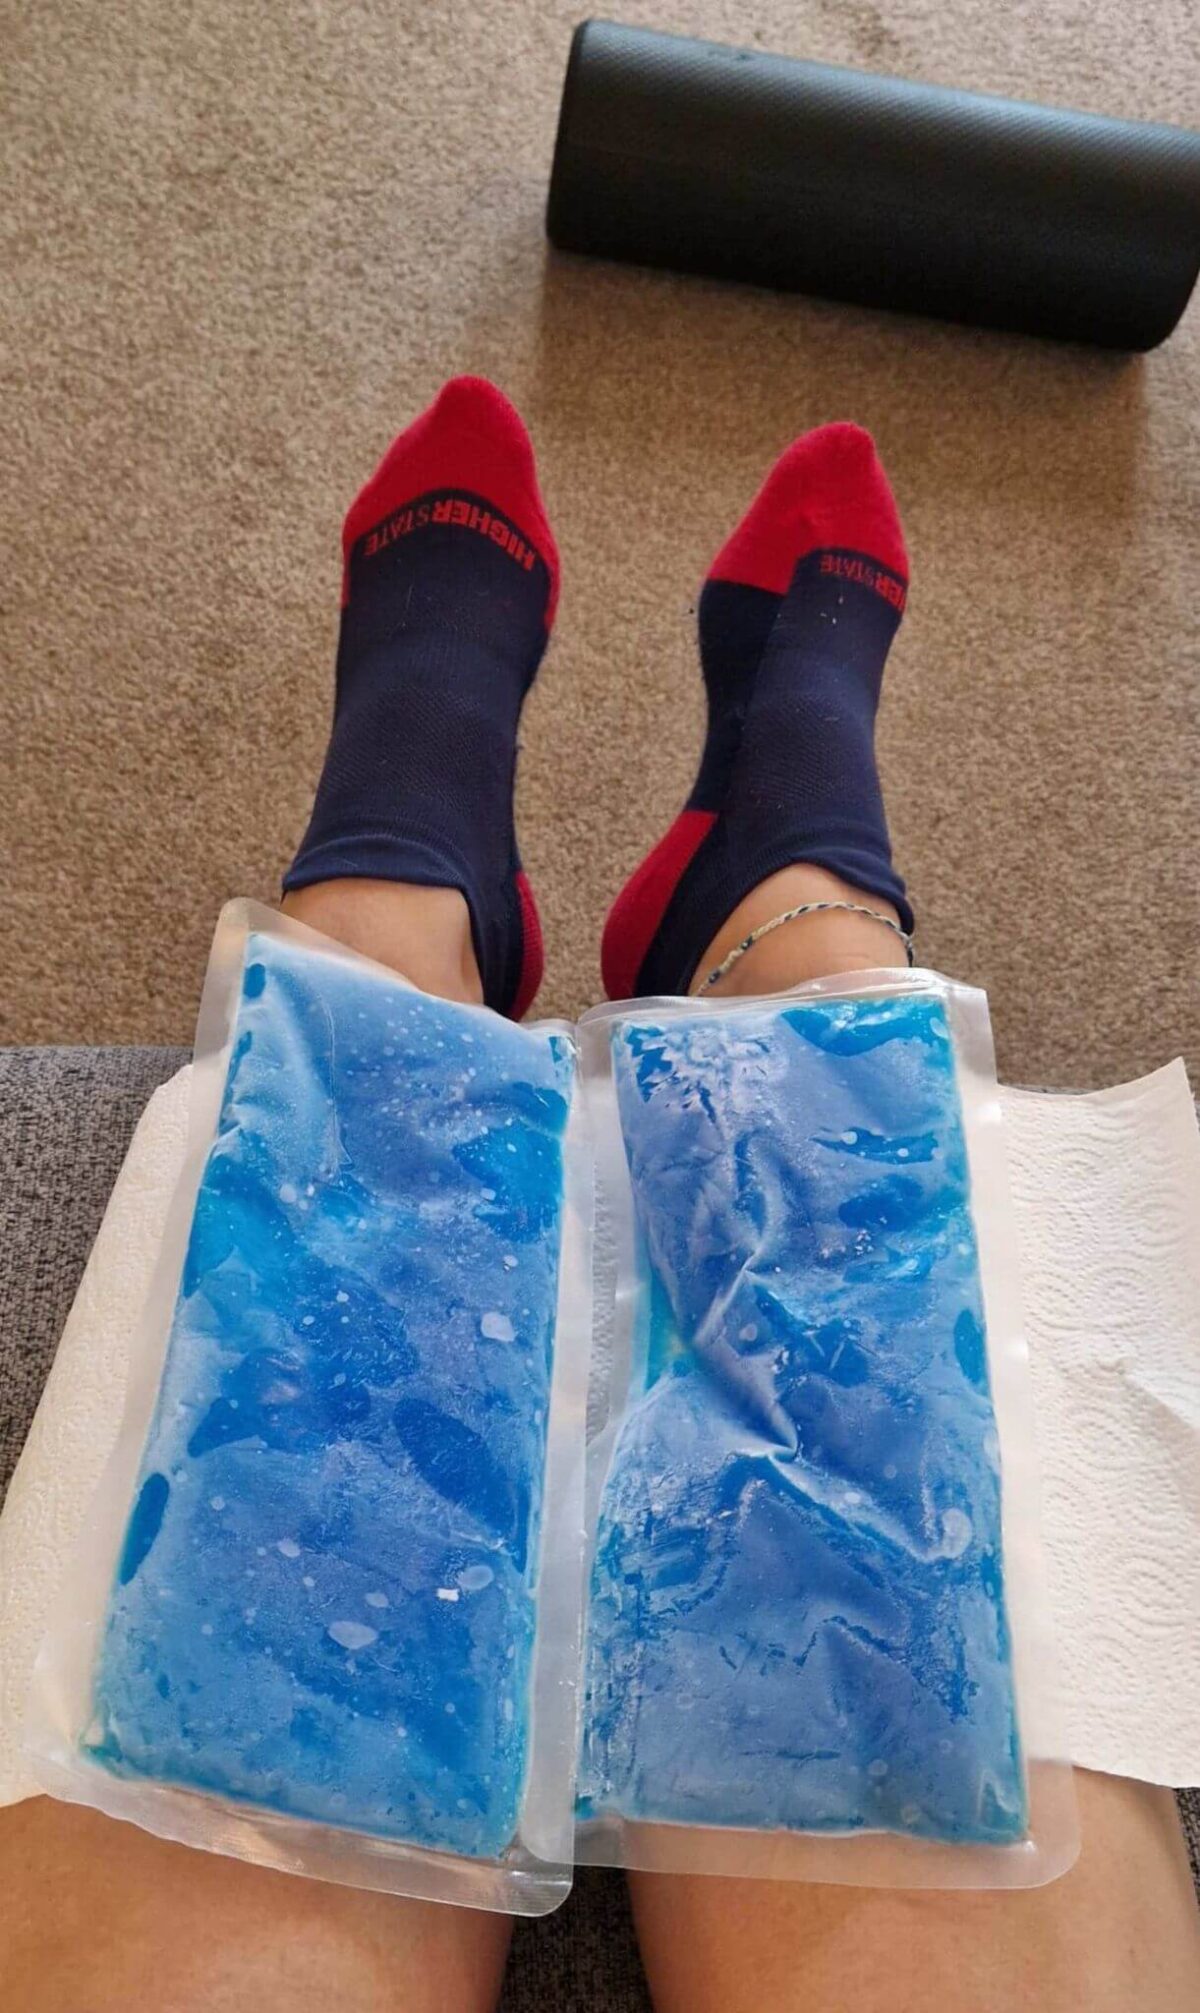 Ice your shin splints with these gel packs